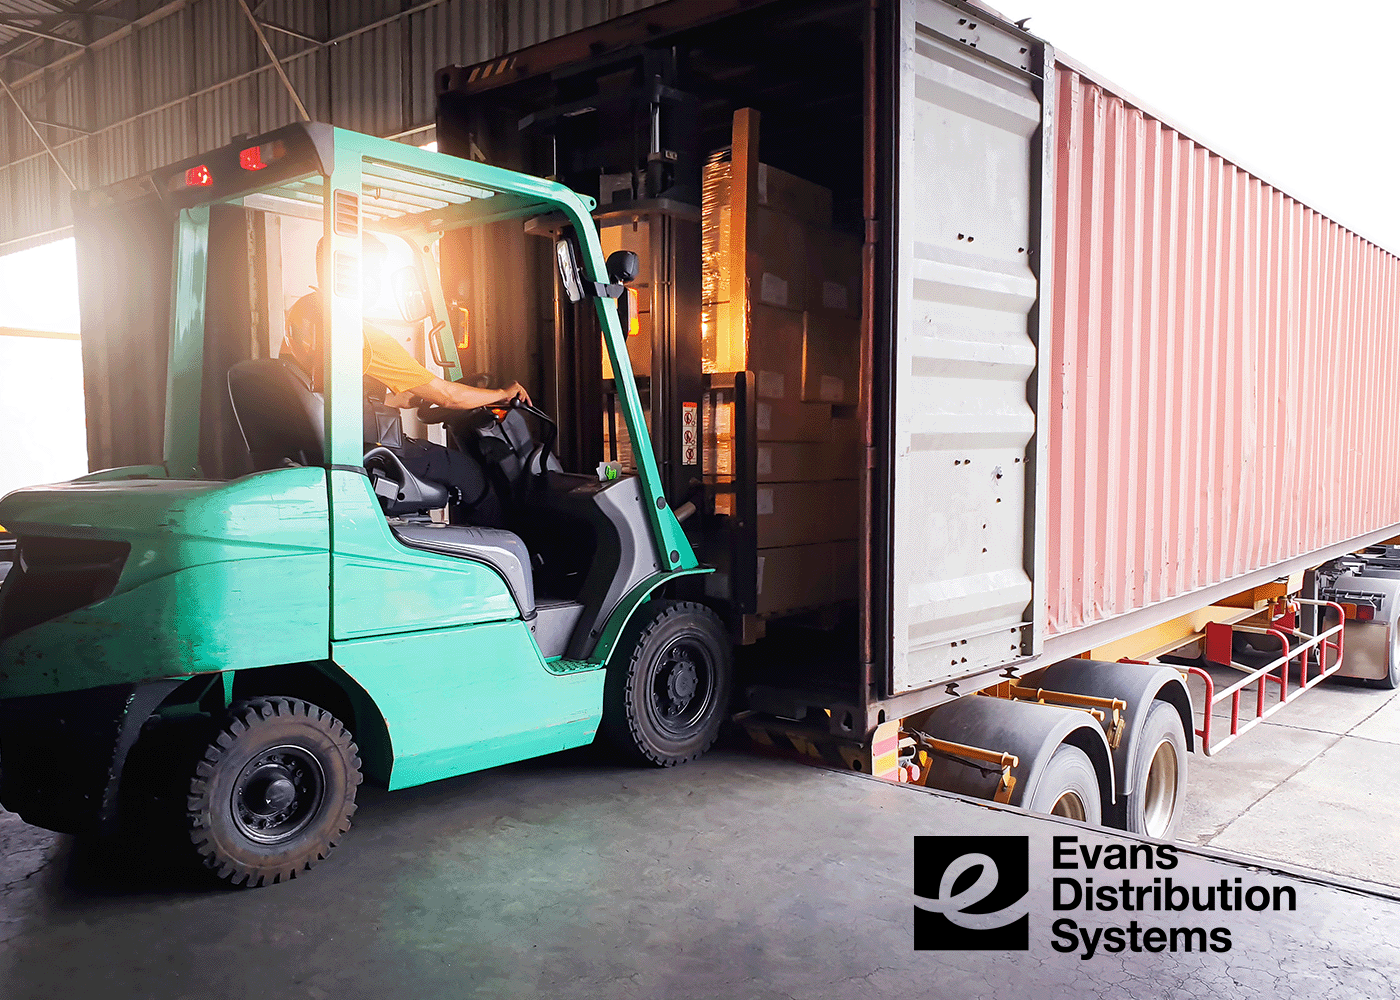 Freight Forwarder Graphic. A forklift unloading a container.